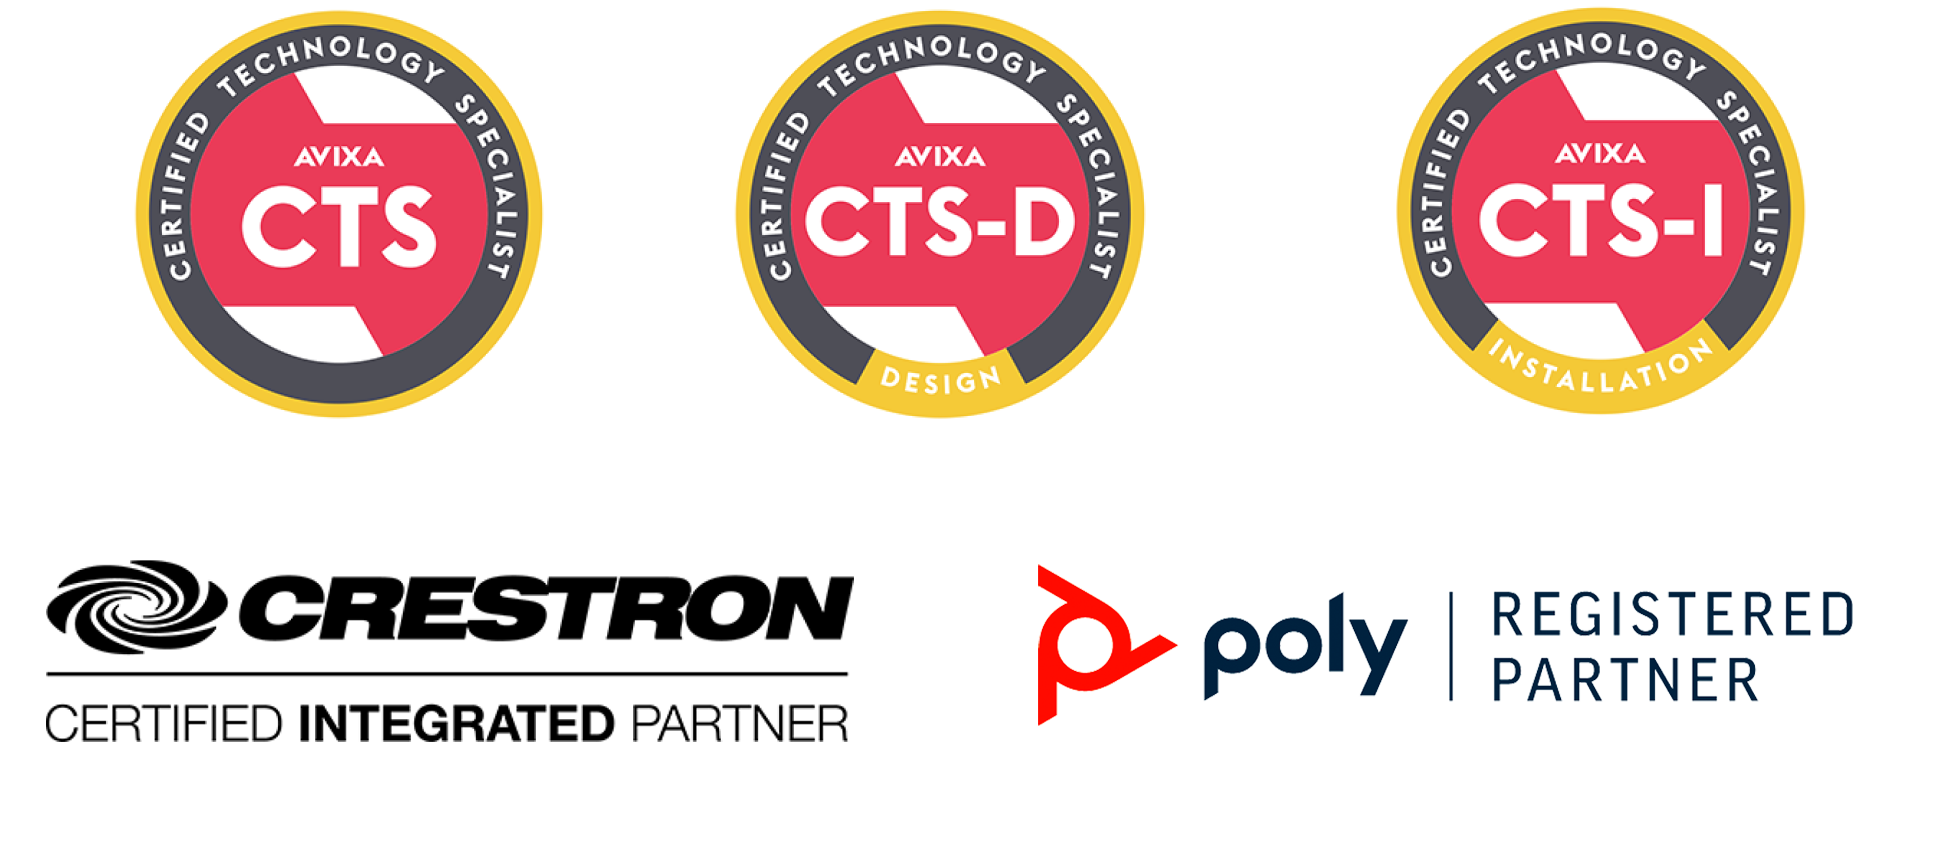 technology install certifications and technology partnerships